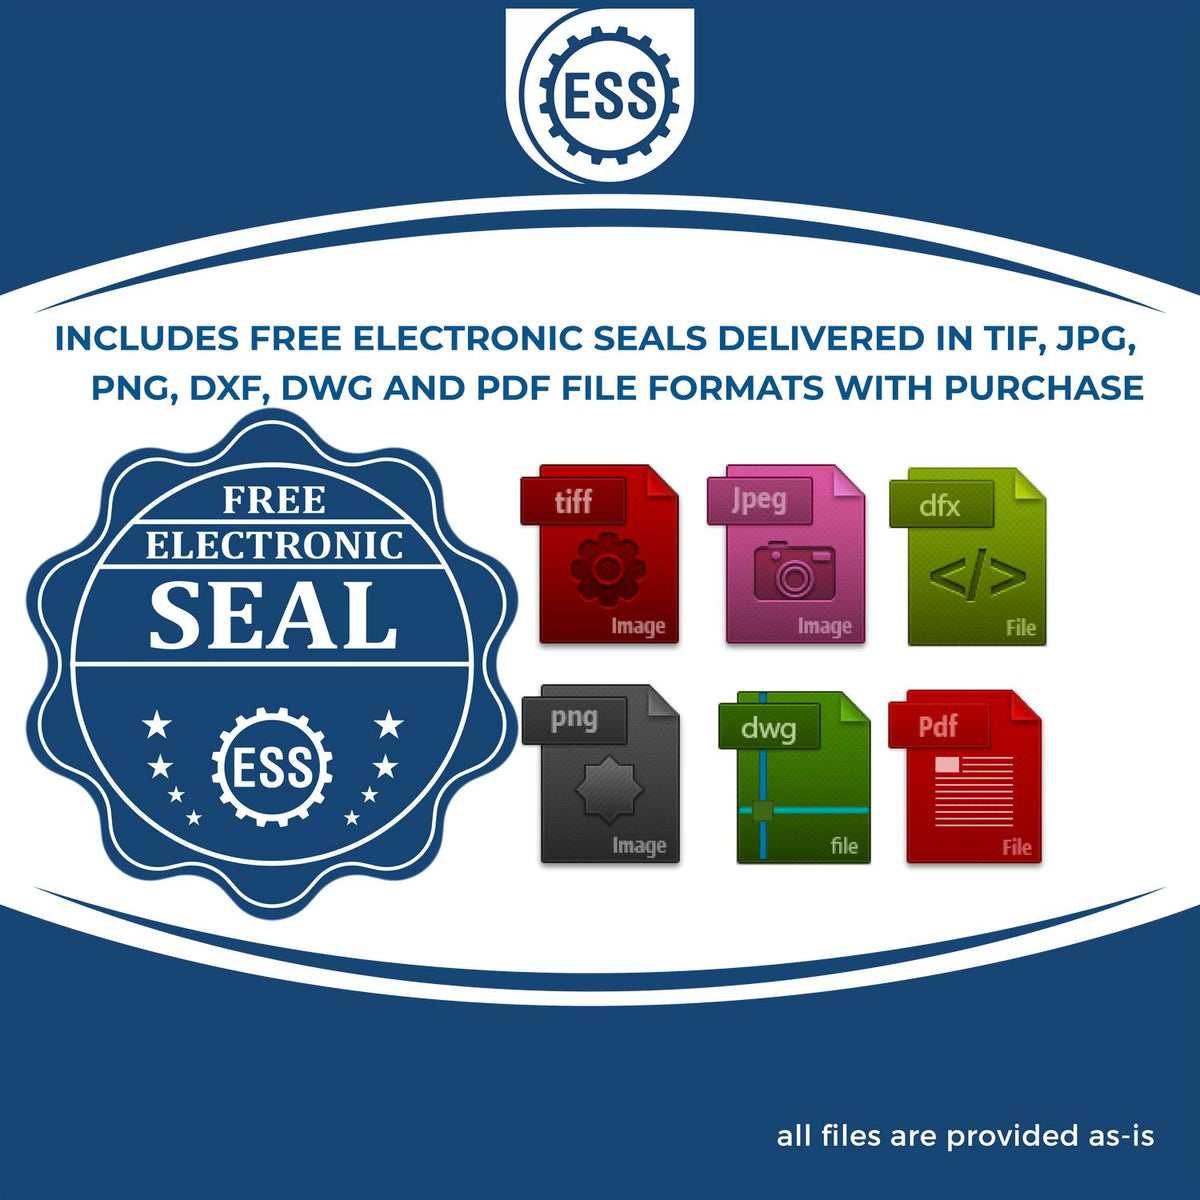 An infographic for the free electronic seal for the Extended Long Reach Virginia Architect Seal Embosser illustrating the different file type icons such as DXF, DWG, TIF, JPG and PNG.